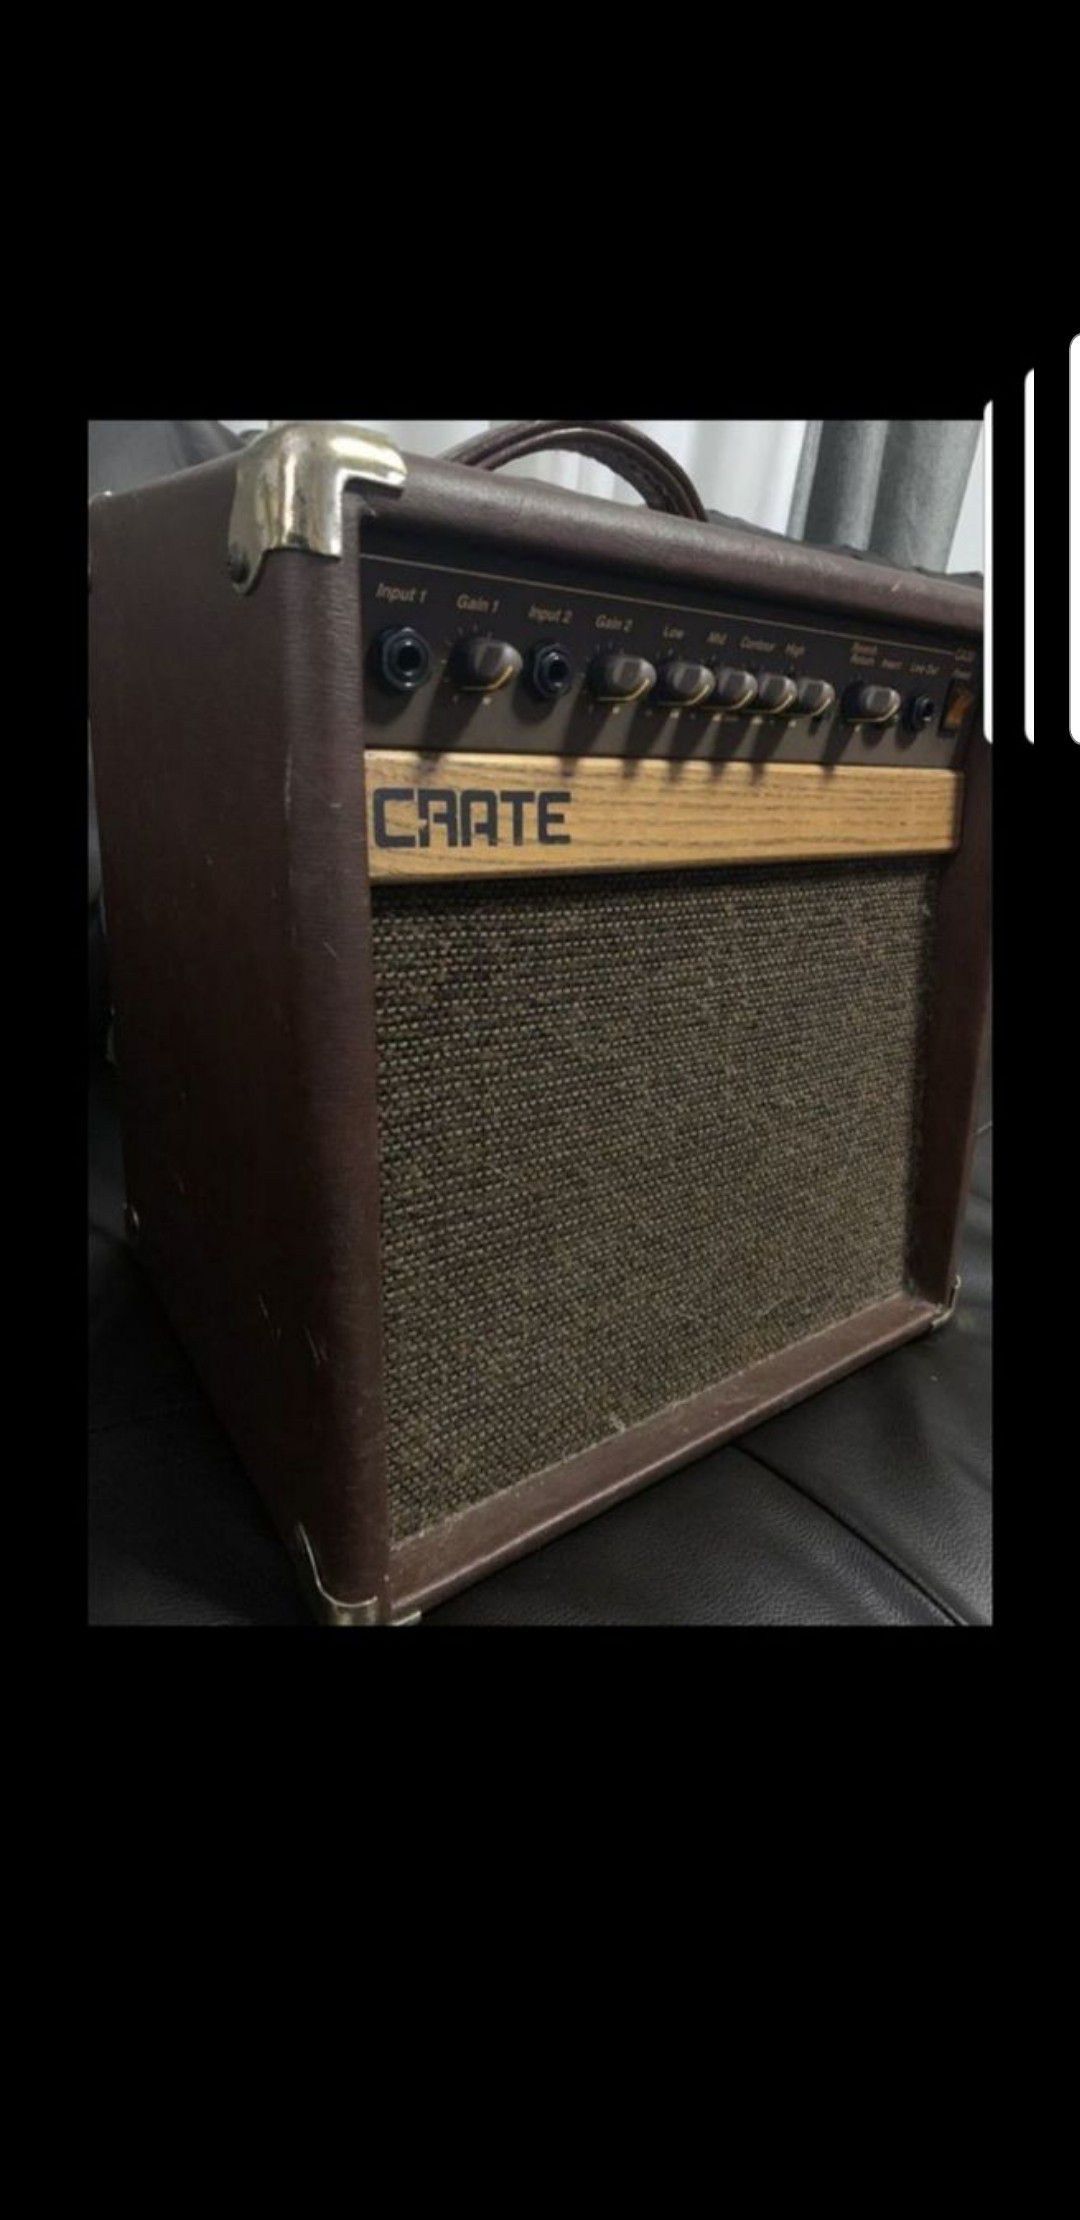 Crate CA30 absolutely great tone amp!!!